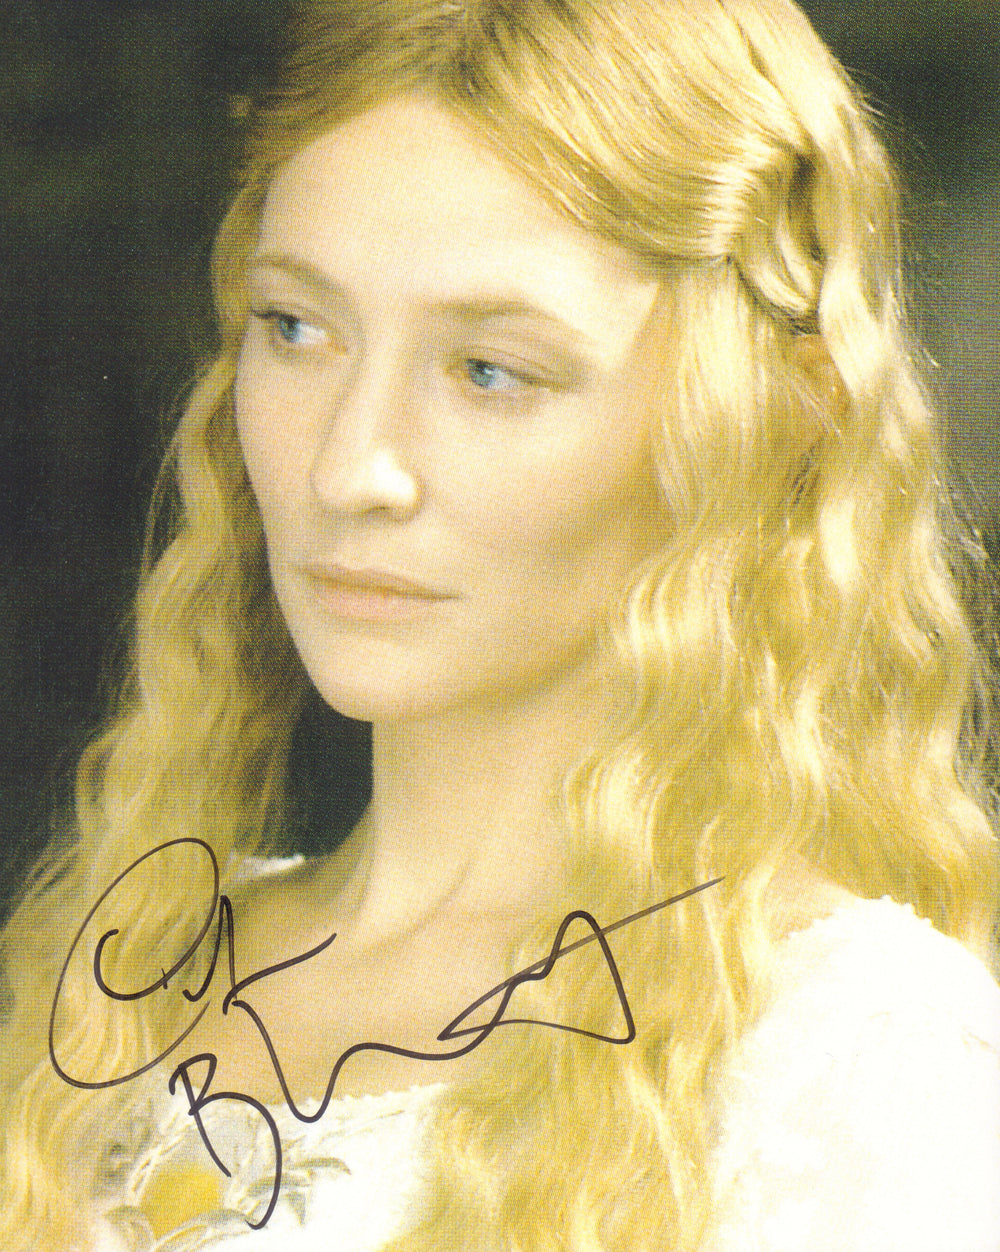 Cate Blanchett as Galadriel in The Lord of the Rings: The Fellowship of the Ring Signed 8x10 Photo